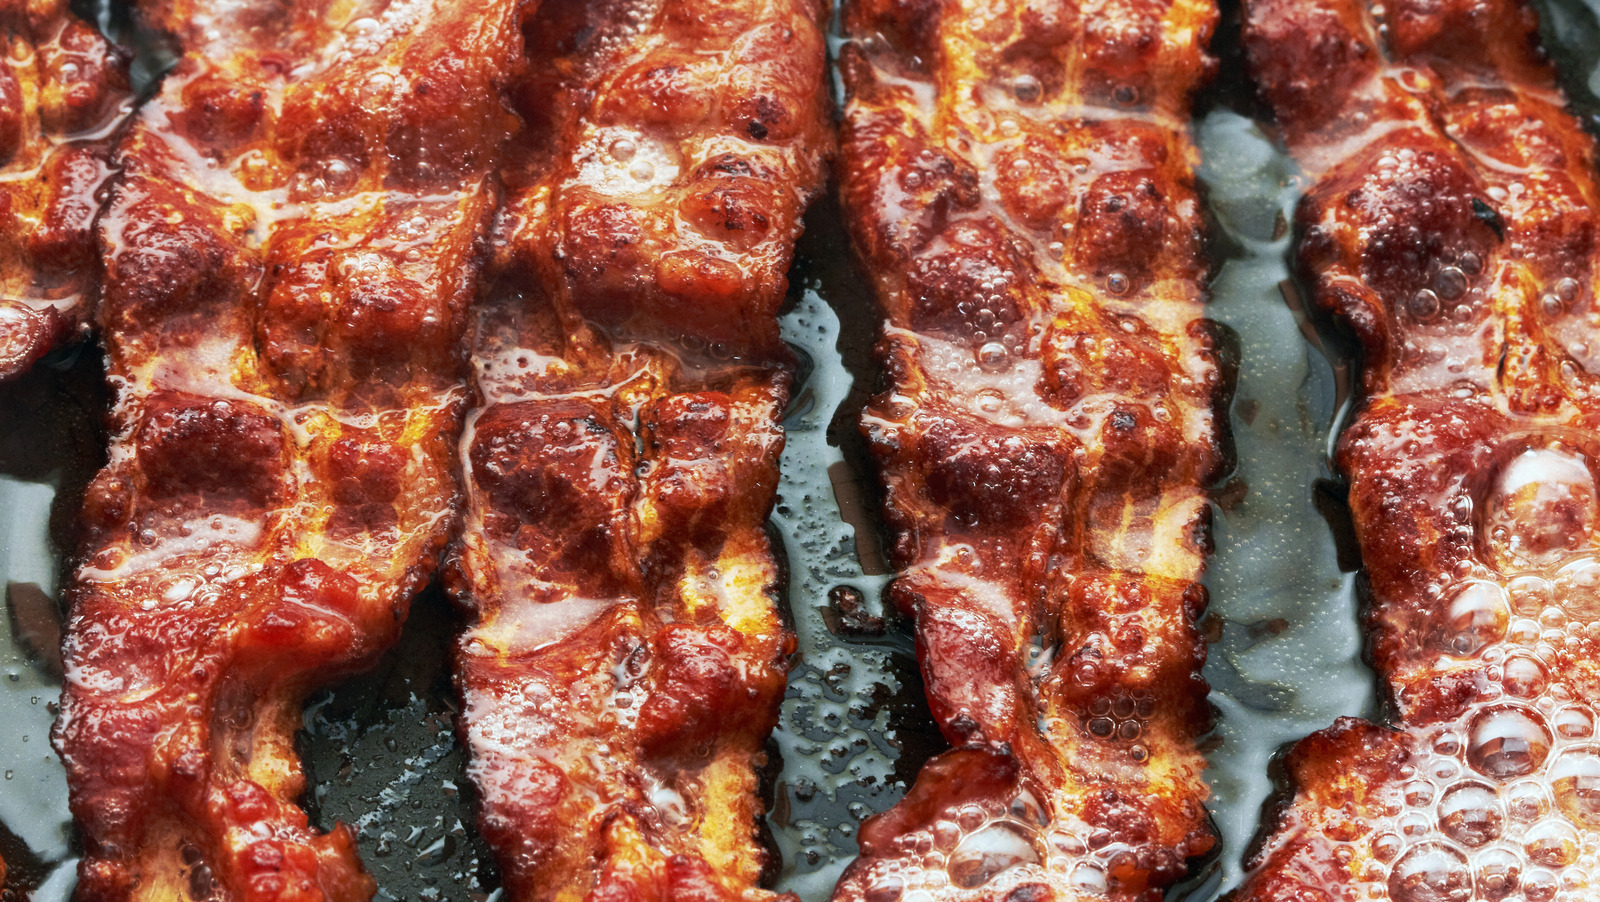 https://www.thedailymeal.com/img/gallery/one-unexpected-ingredient-will-always-give-you-crispy-bacon/l-intro-1668546290.jpg